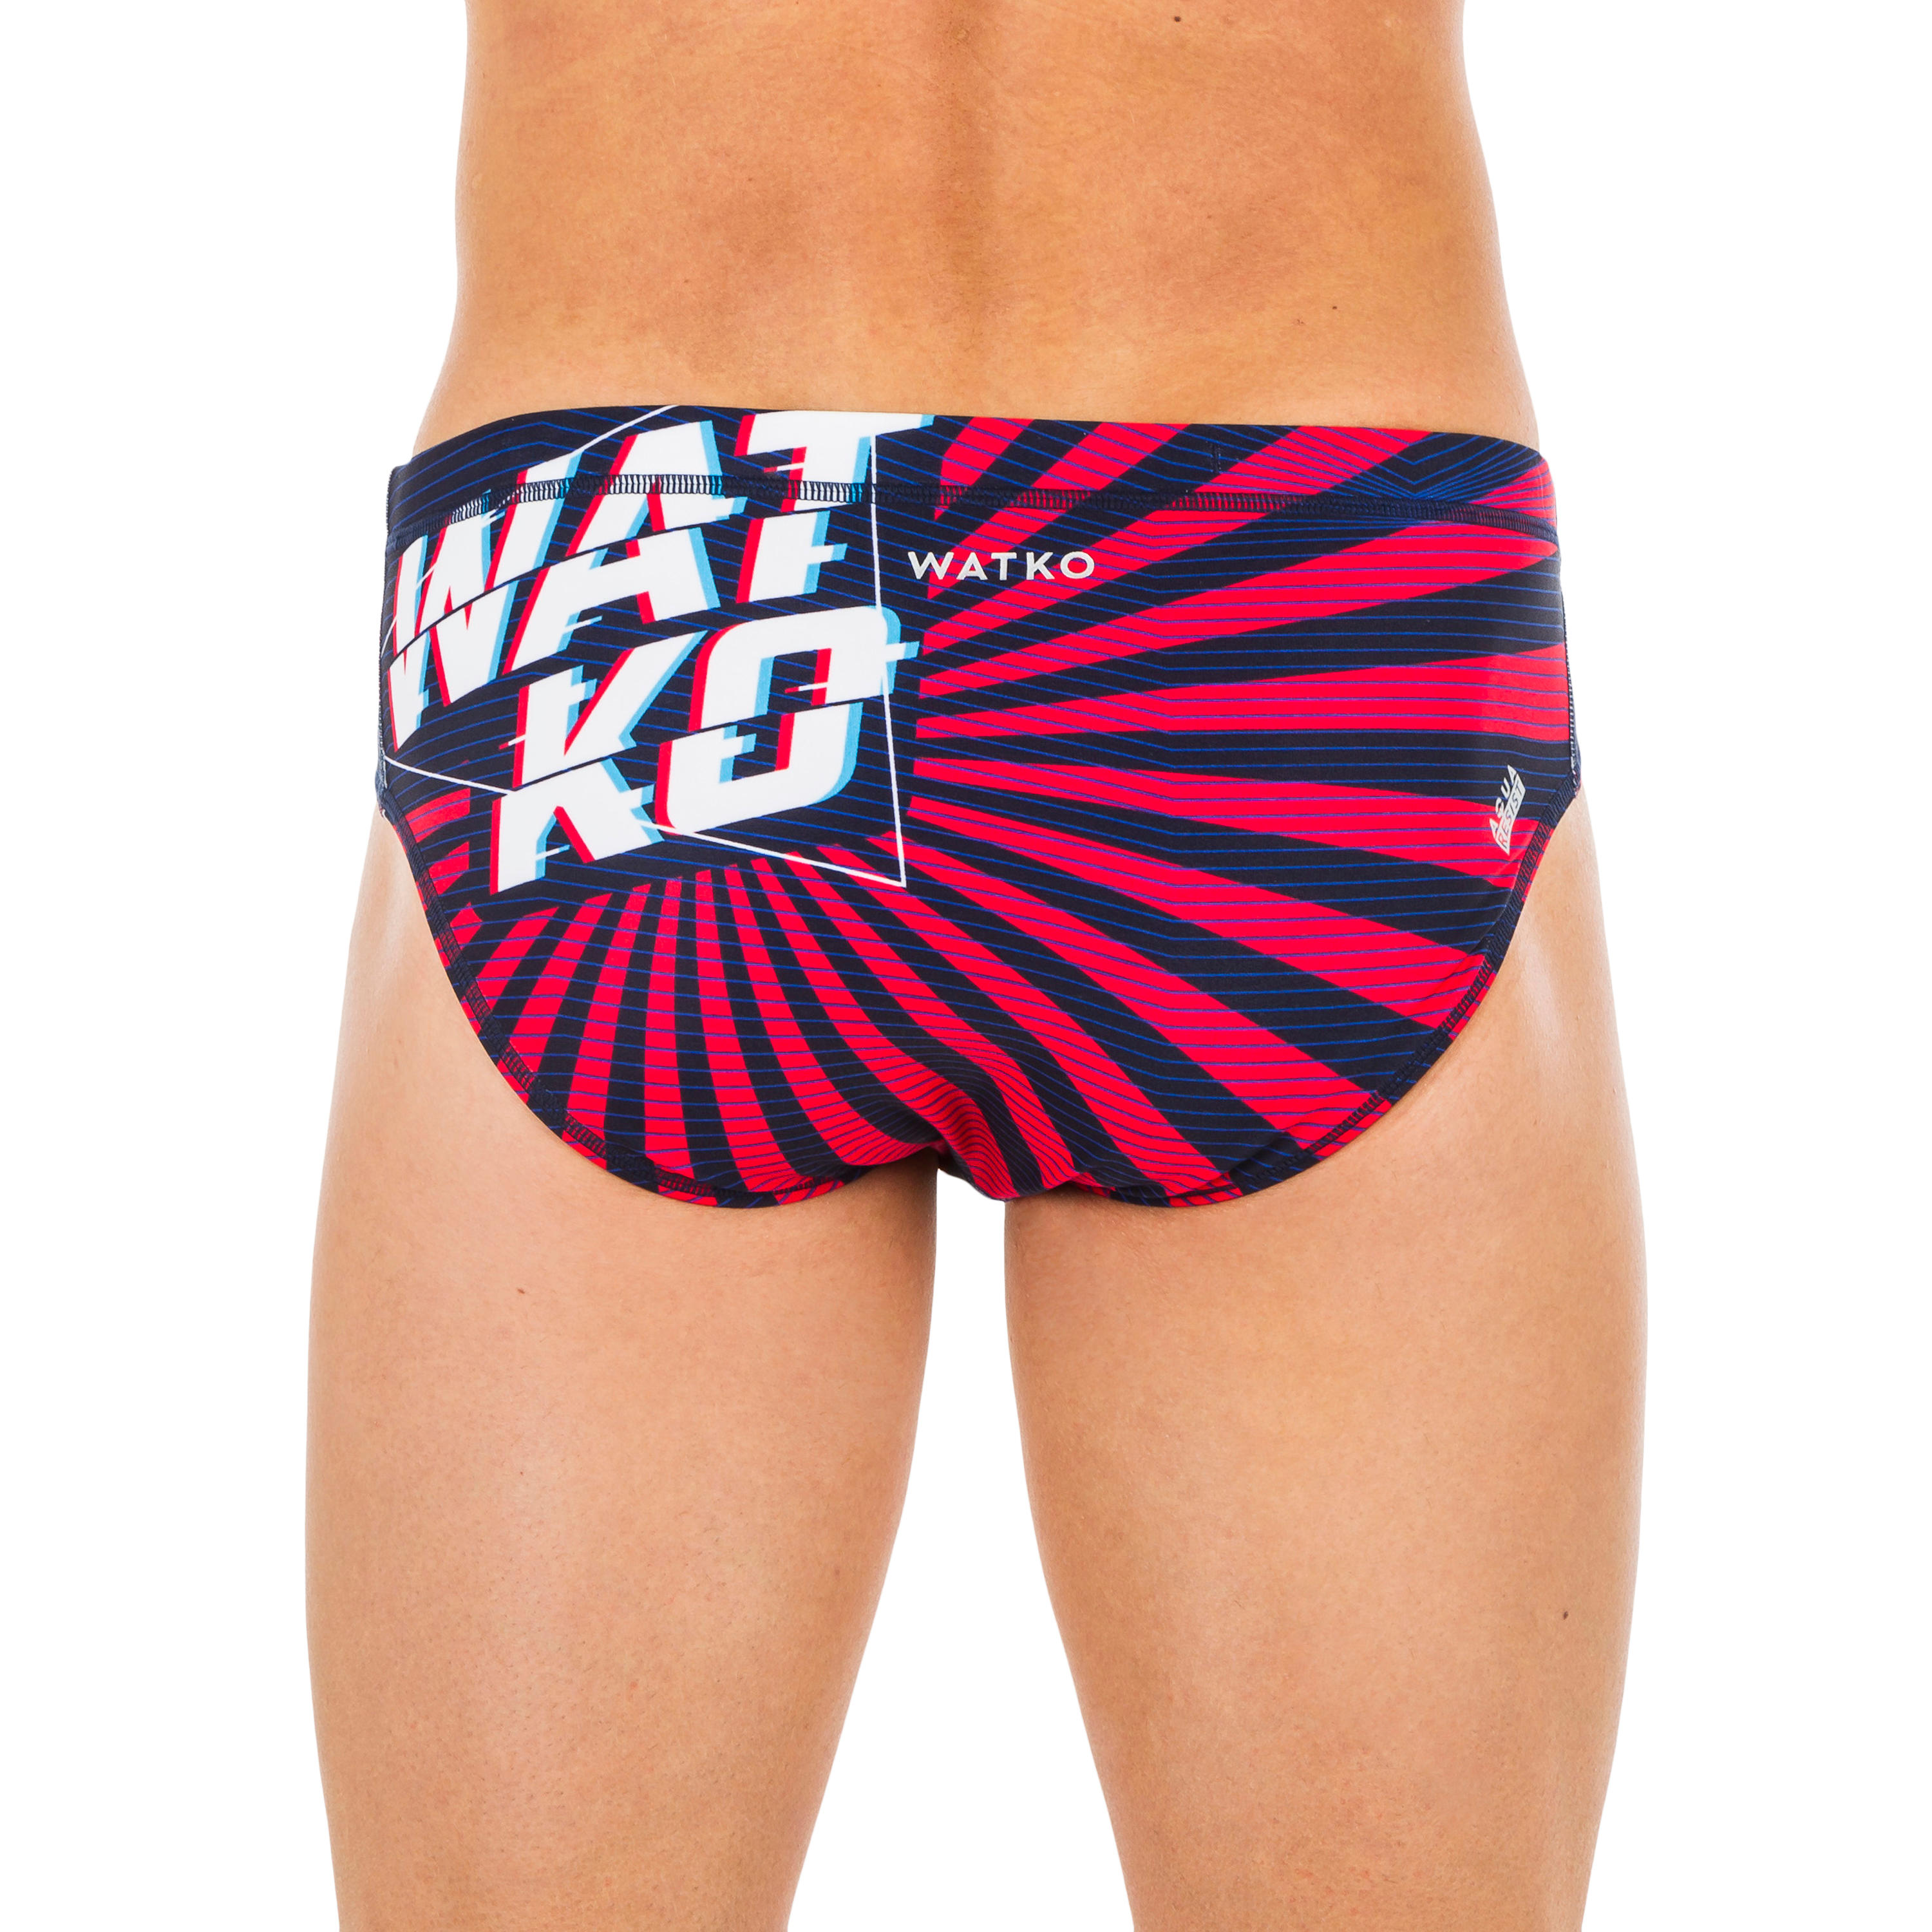 MEN'S WATER POLO SWIMMING BRIEFS - JAPAN BLUE RED 3/6